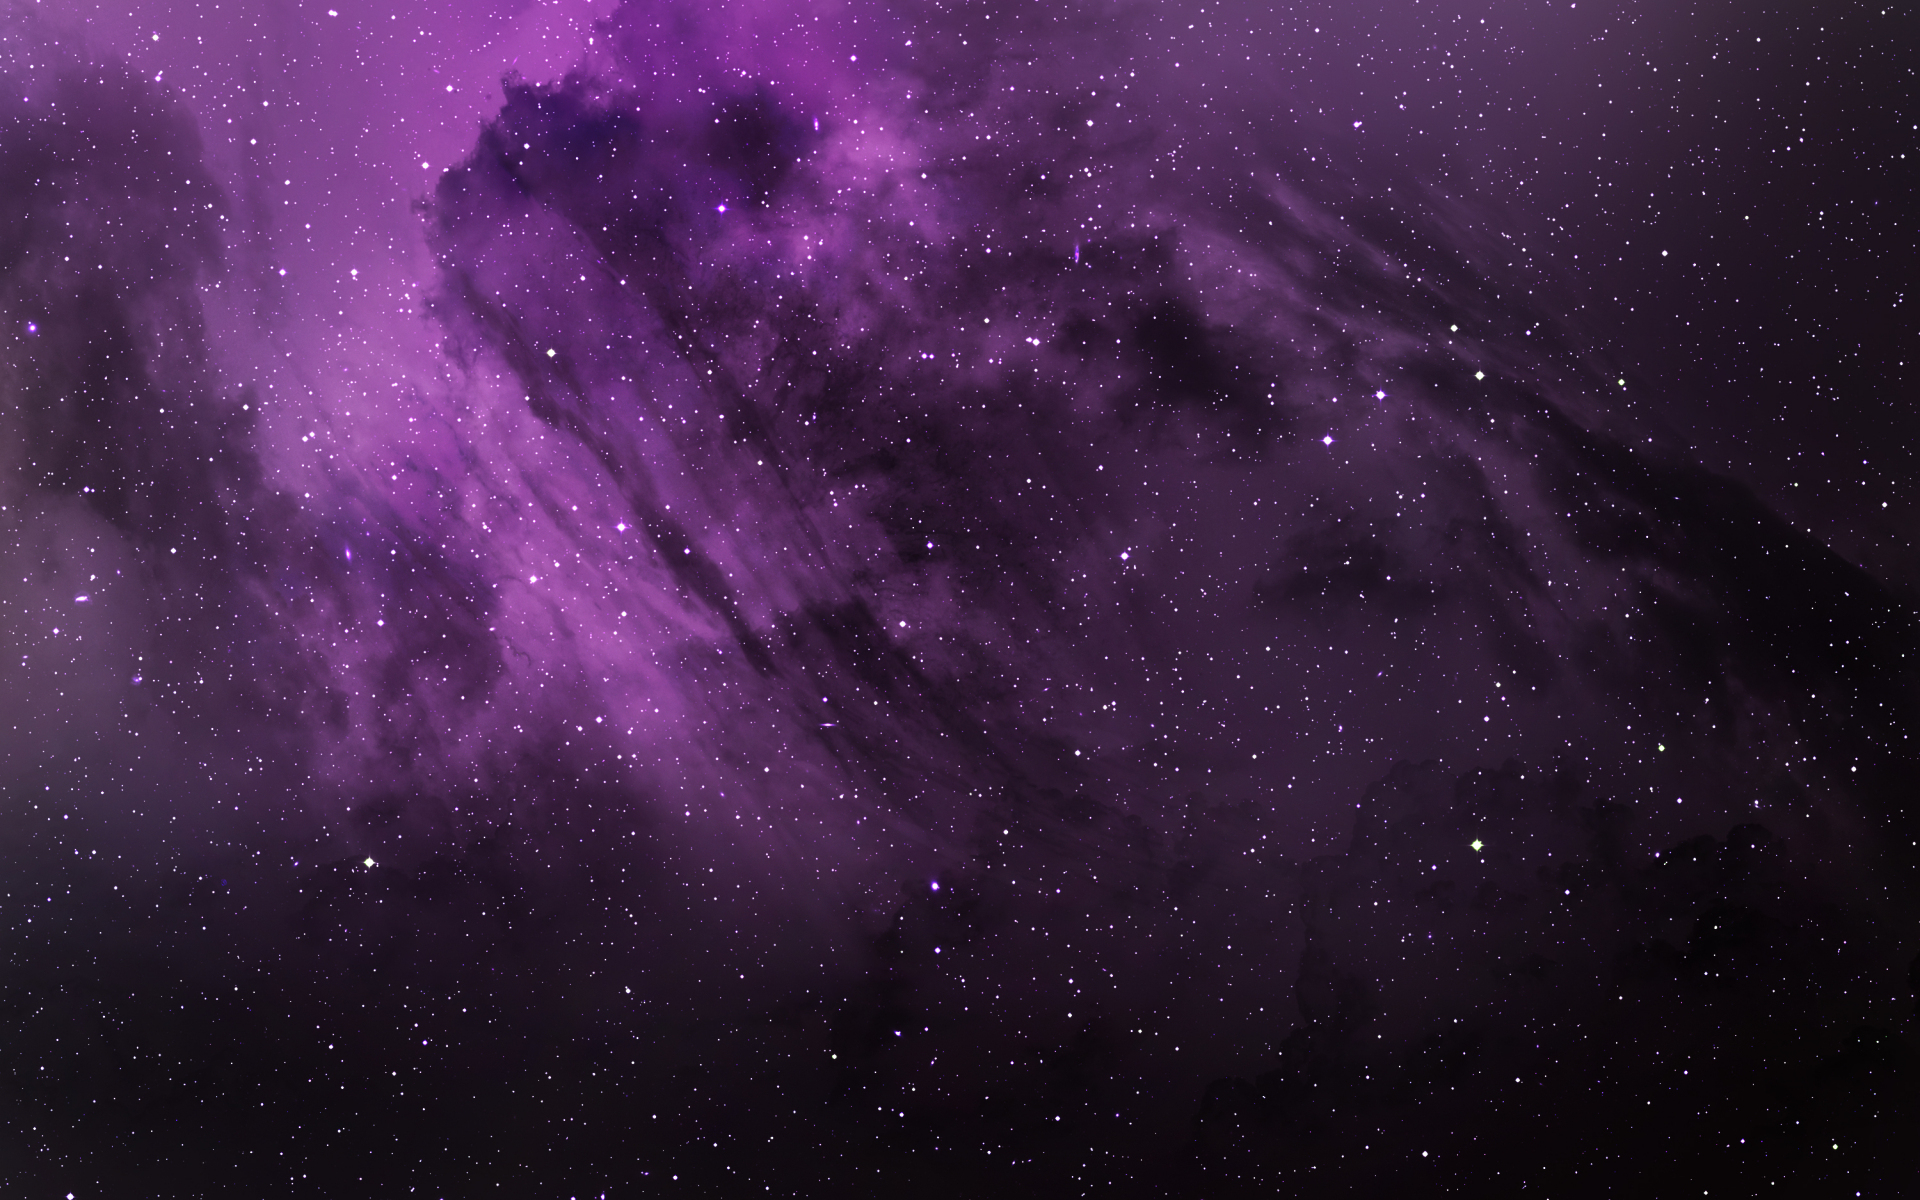 1920x1200 Download purple clouds, cosmos, stars, space wallpaper, 16:10 widescreen hd image, background, 23217